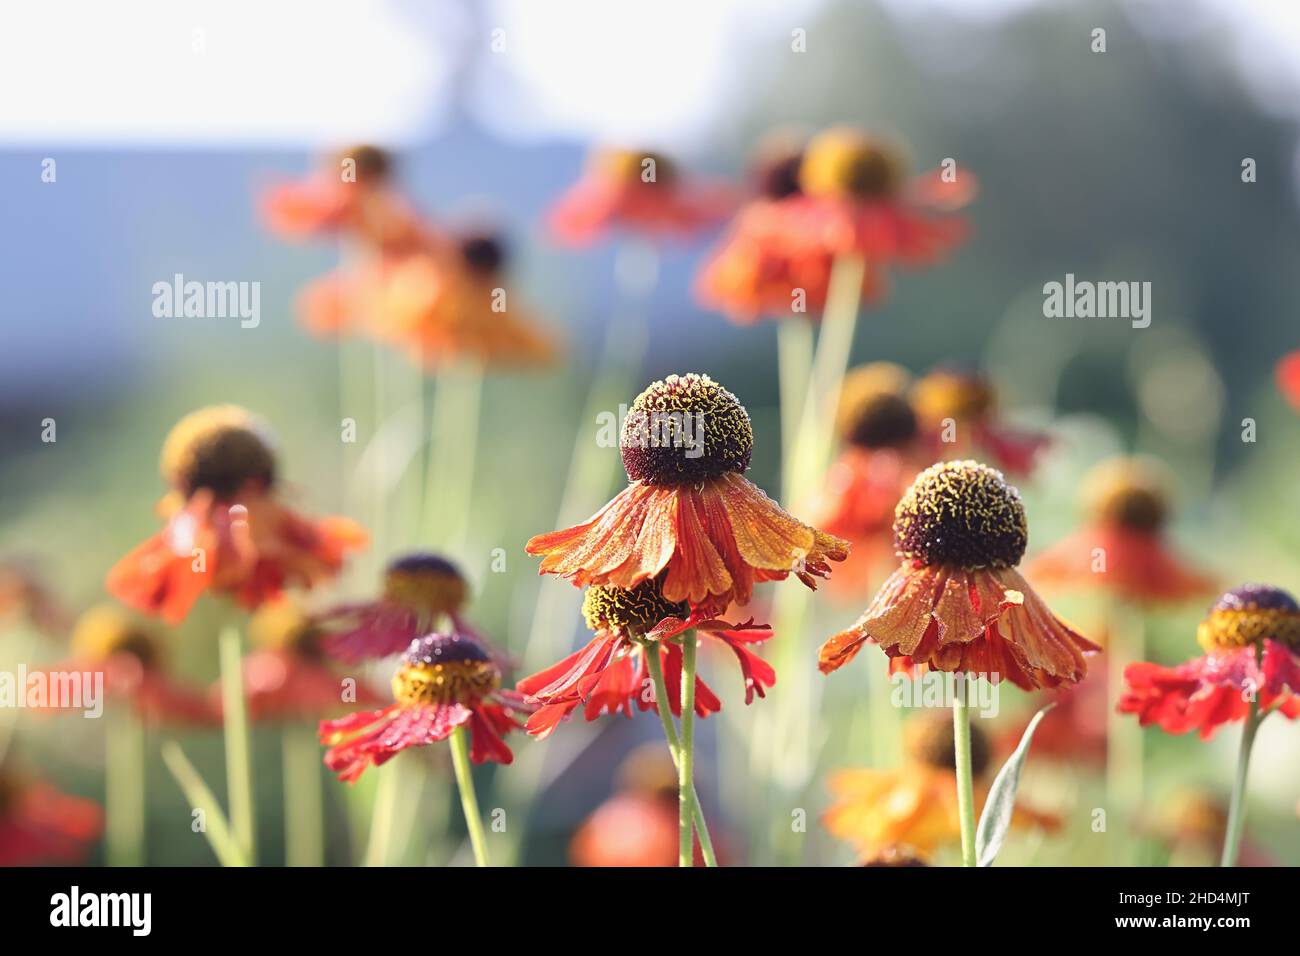 Helenium autumnale ‘Moerheim Beauty’, known as common sneezeweed or large-flowered sneezeweed, garden plant from Finland Stock Photo